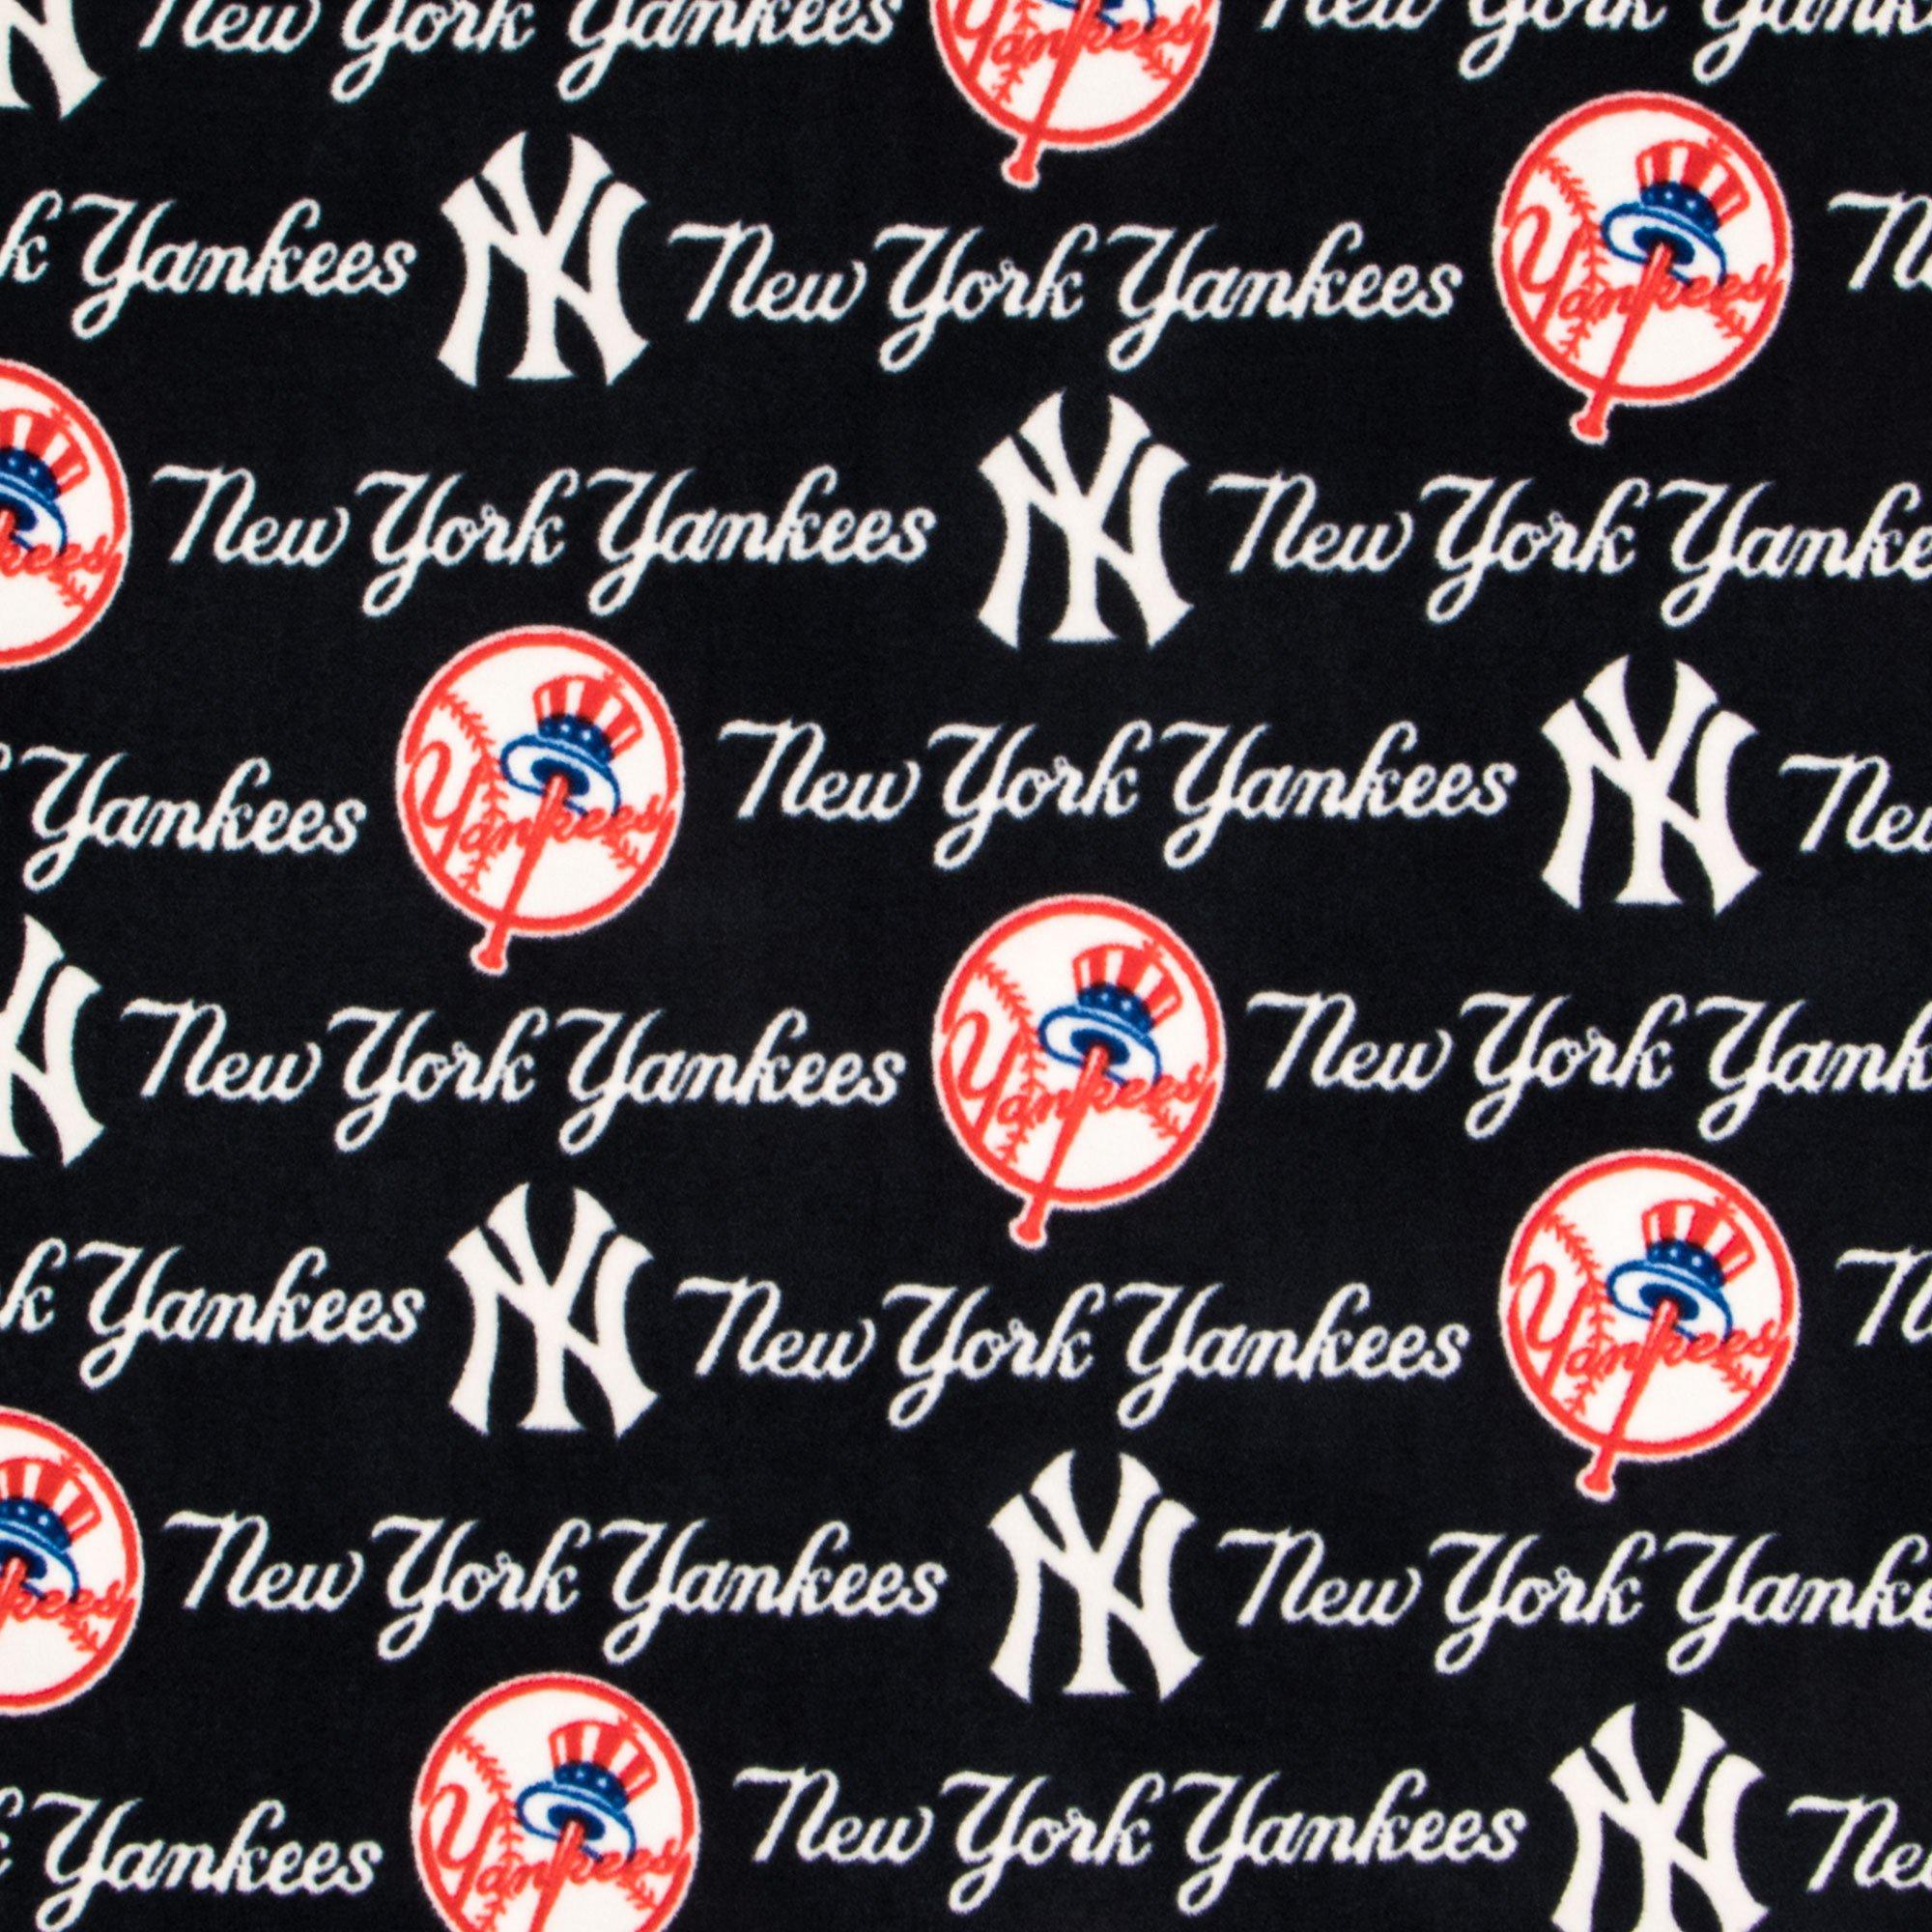 New York Yankees Personalized Baby Blanket - White